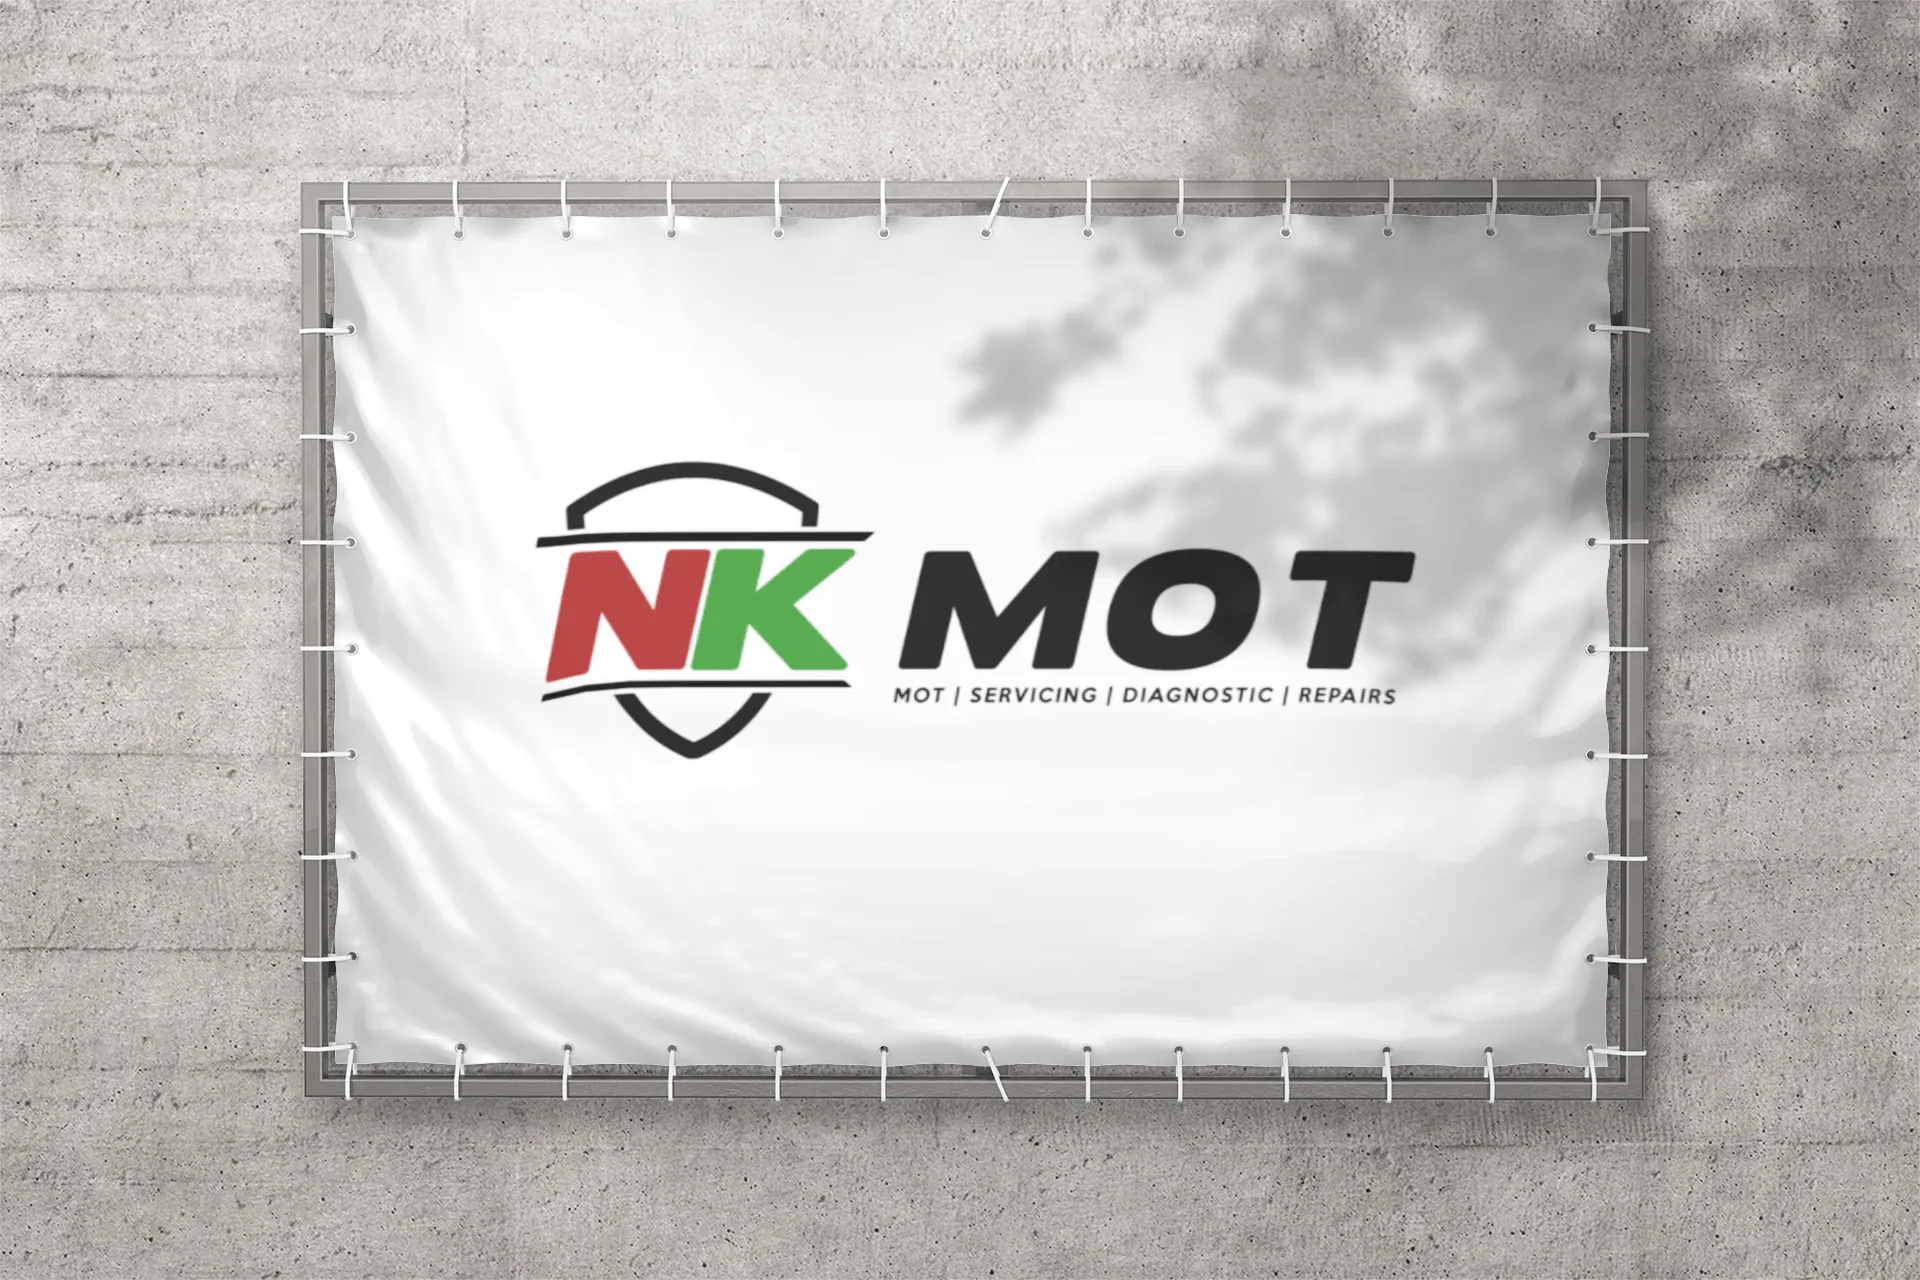 A white banner with the NK mot logo on it